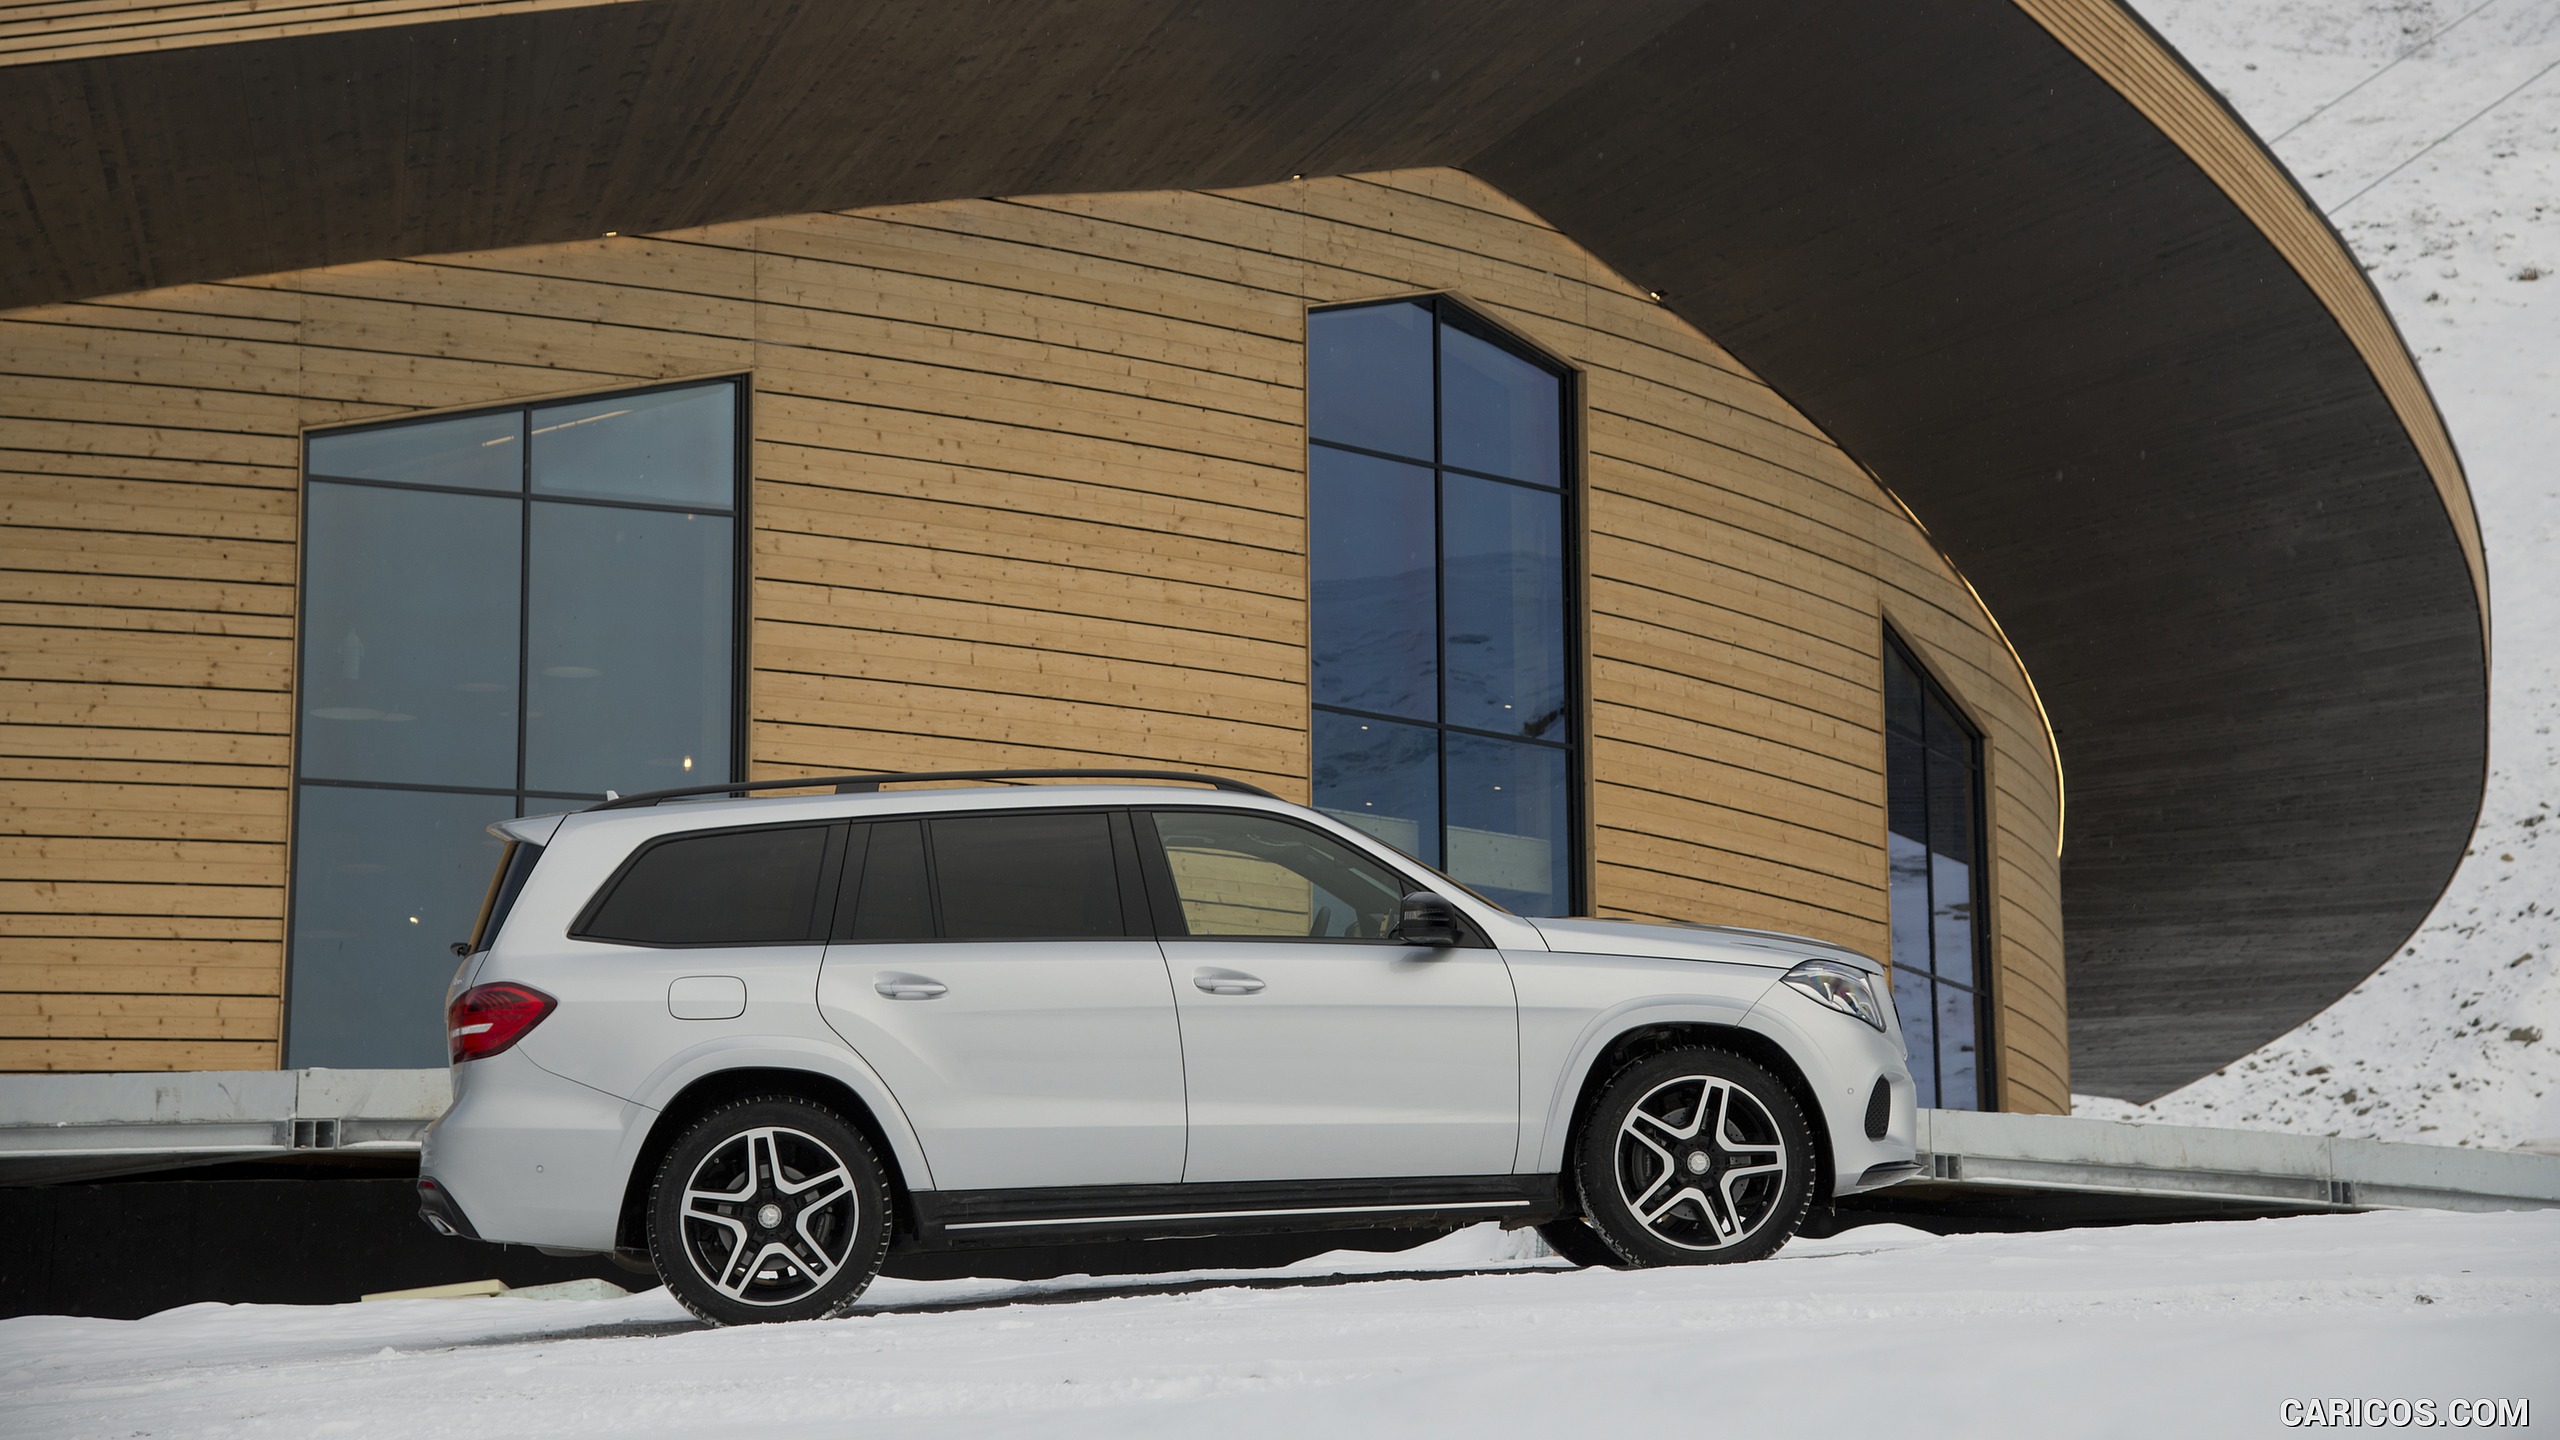 2017 Mercedes-Benz GLS 500 4MATIC AMG Line in Snow - Side, #159 of 255